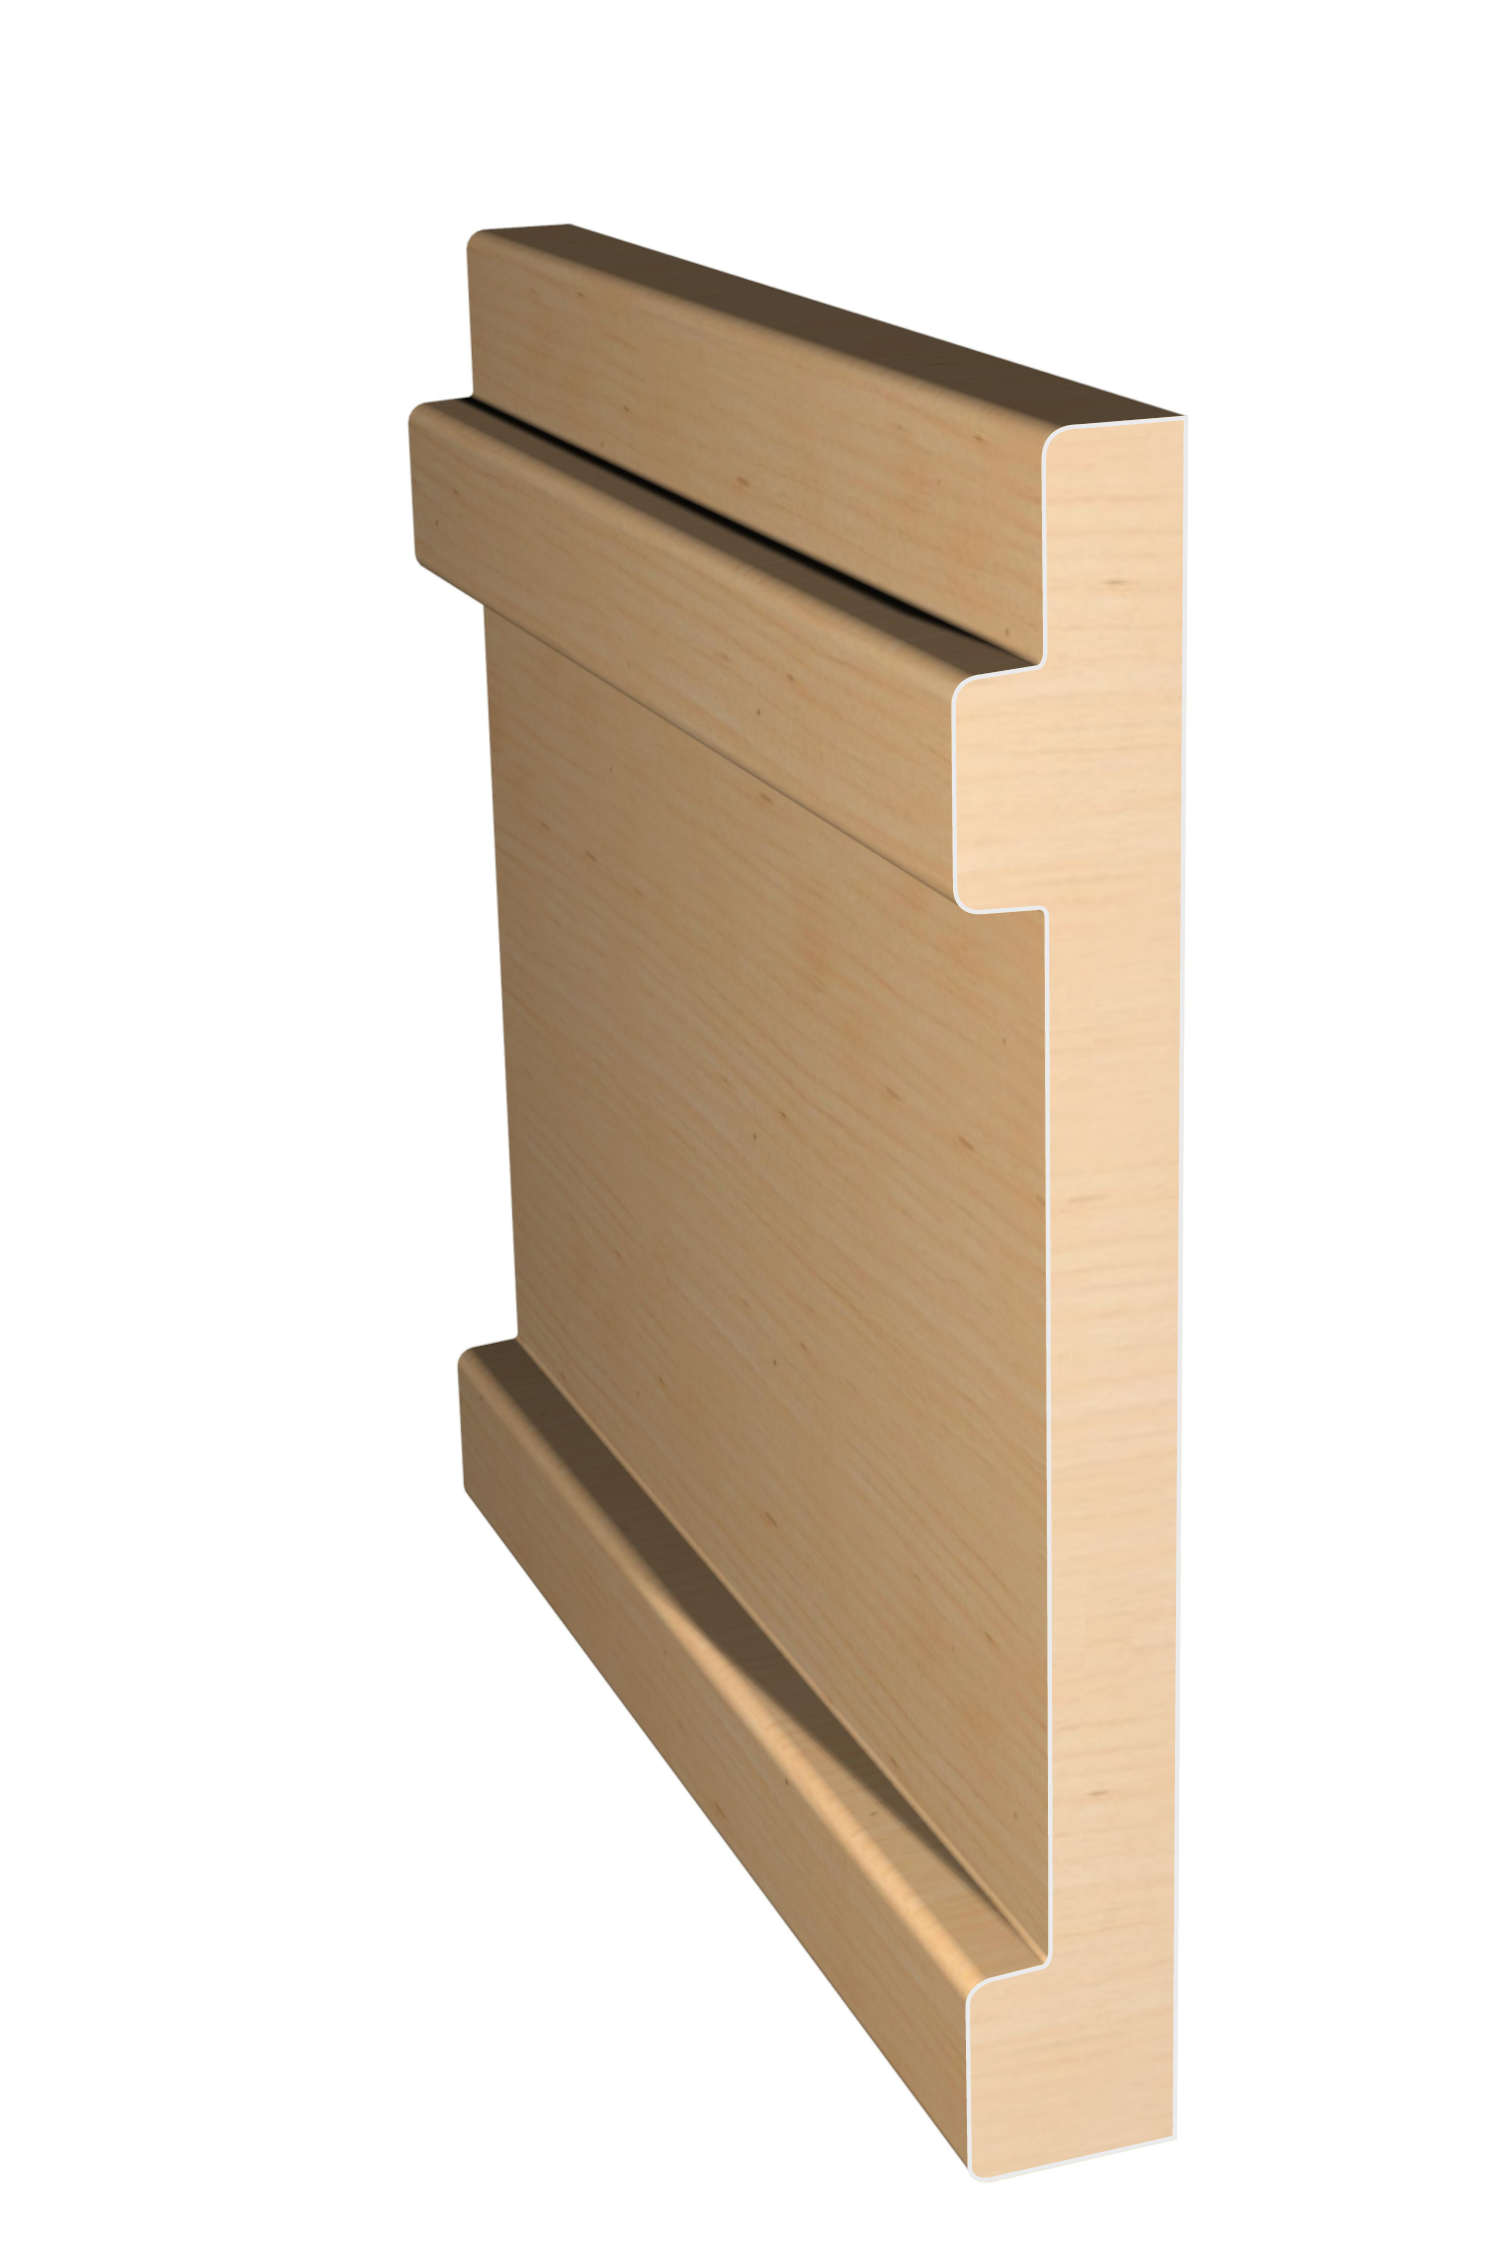 Three dimensional rendering of custom base wood molding BAPL5347 made by Public Lumber Company in Detroit.